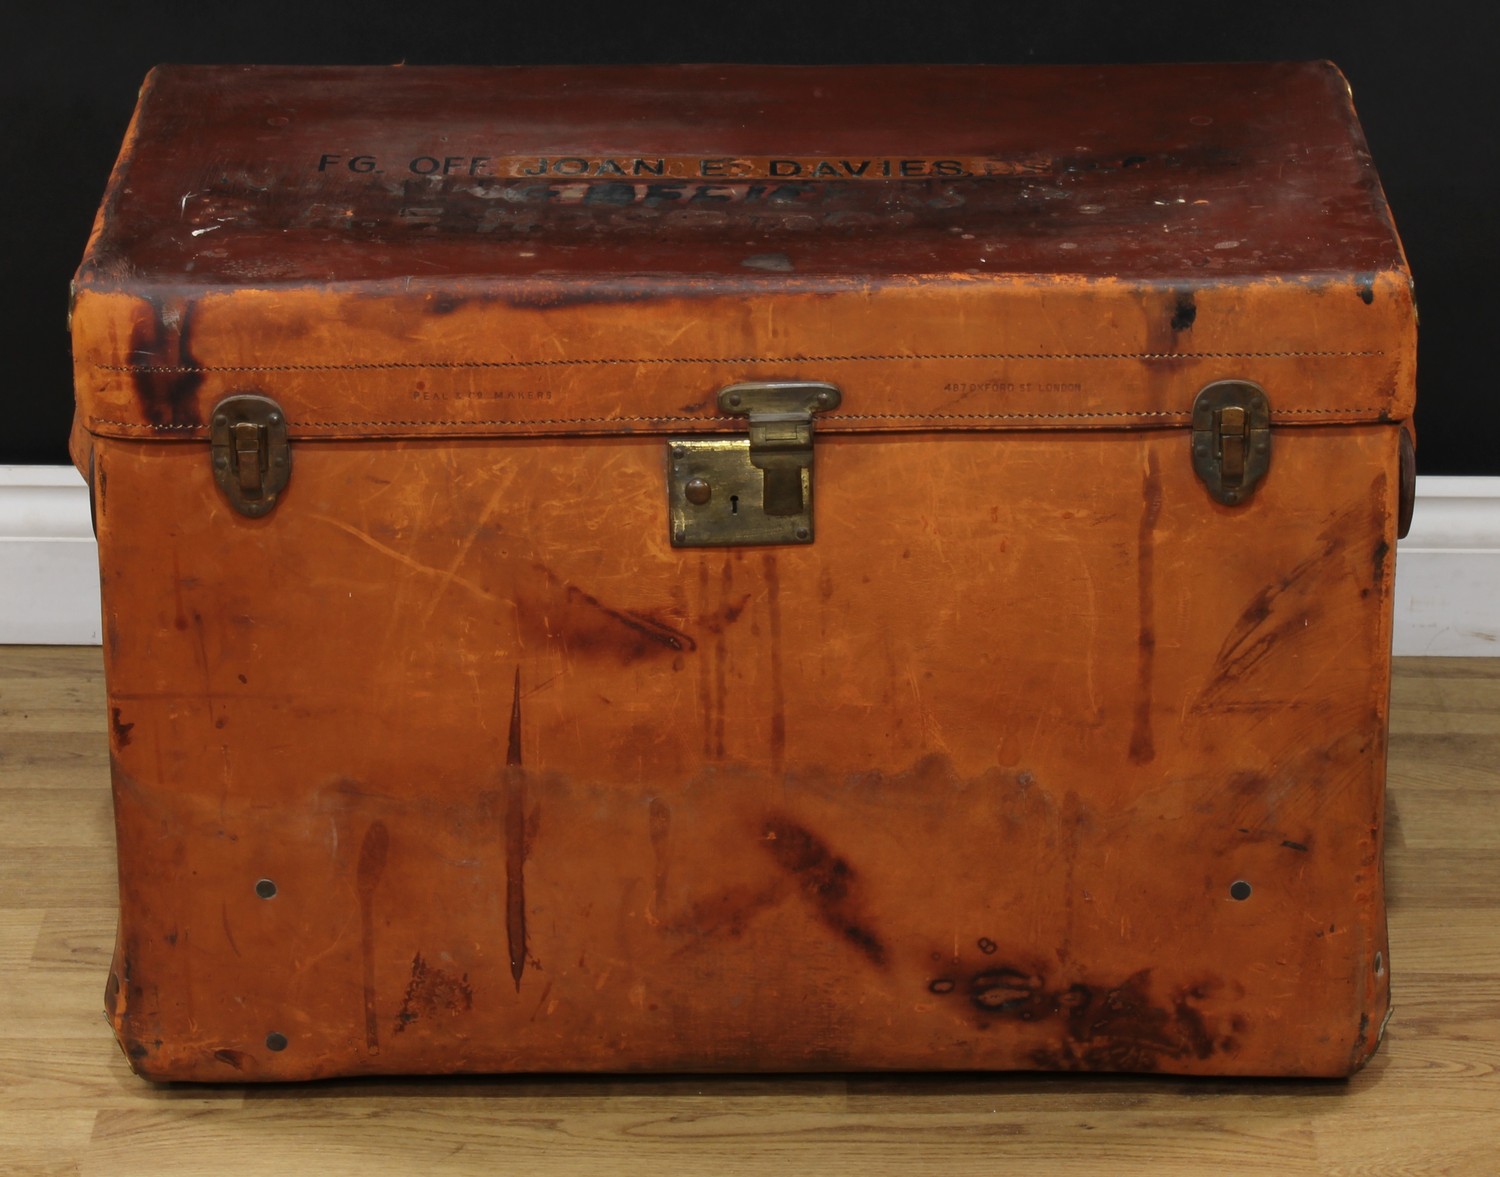 An early 20th century leather trunk, by Peal & Co Makers, 487 Oxford Street, London, carry handles